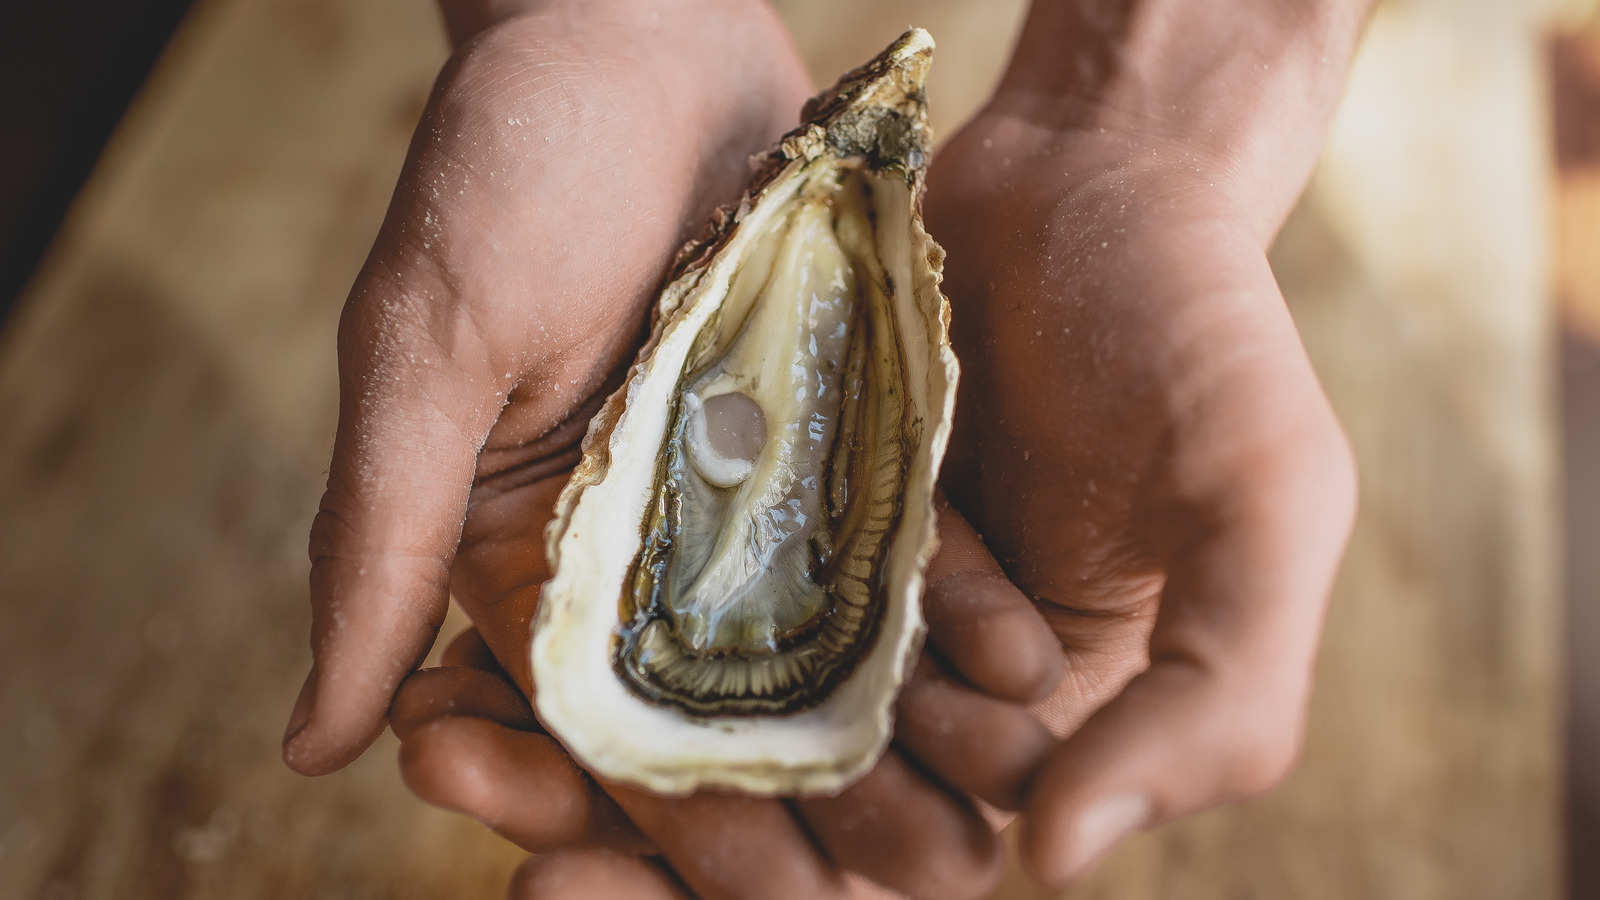 The Real Reason You Should Stop Eating Raw Oysters